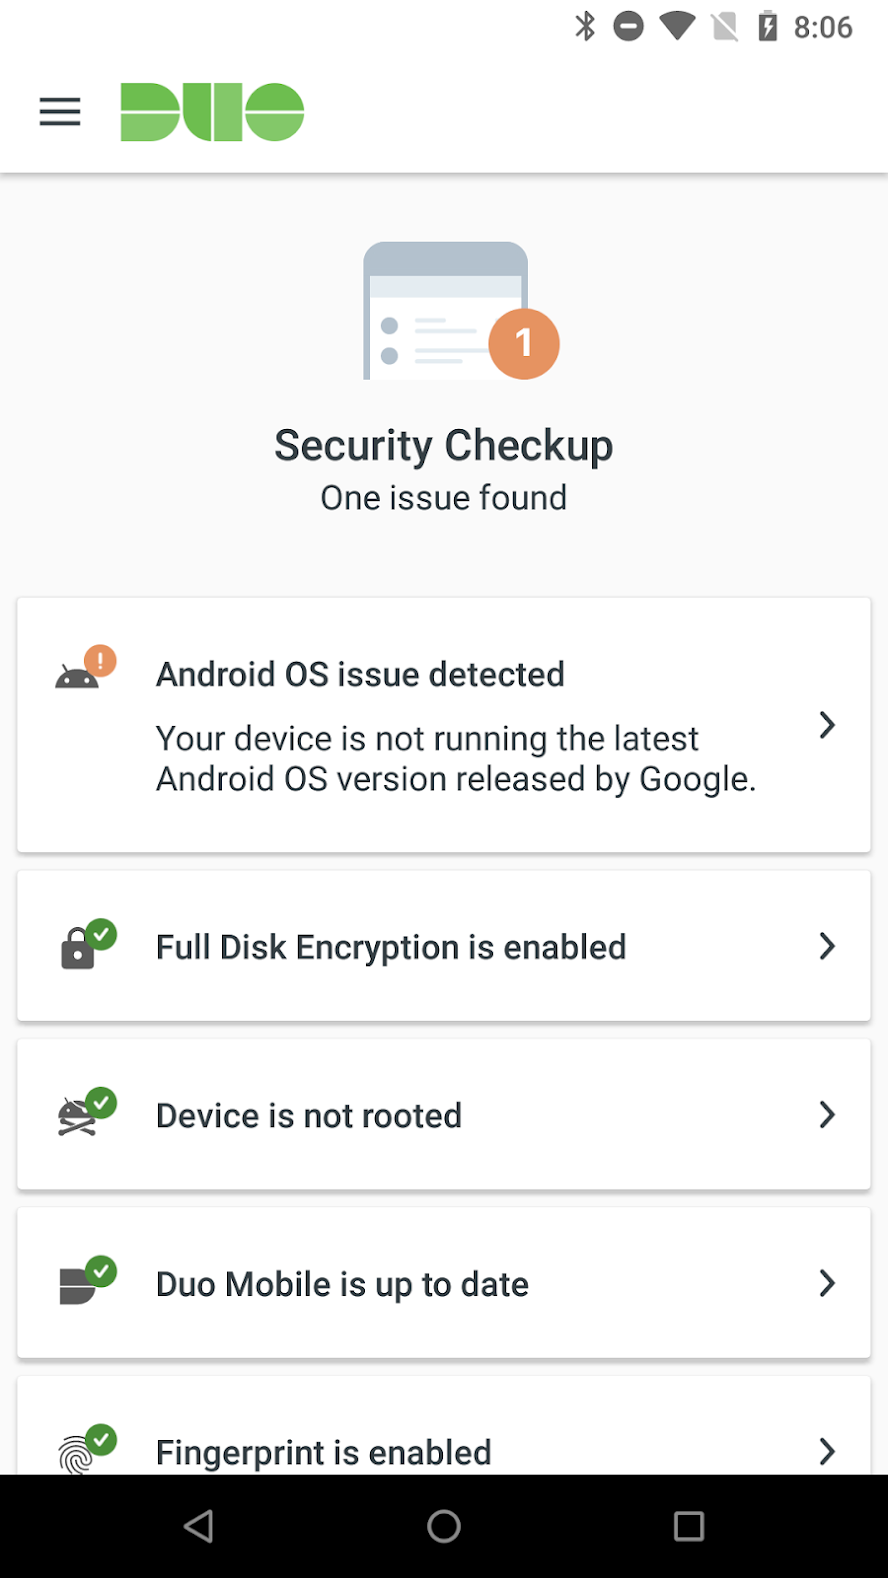 Duo Mobile Security Checkup - Issues Found